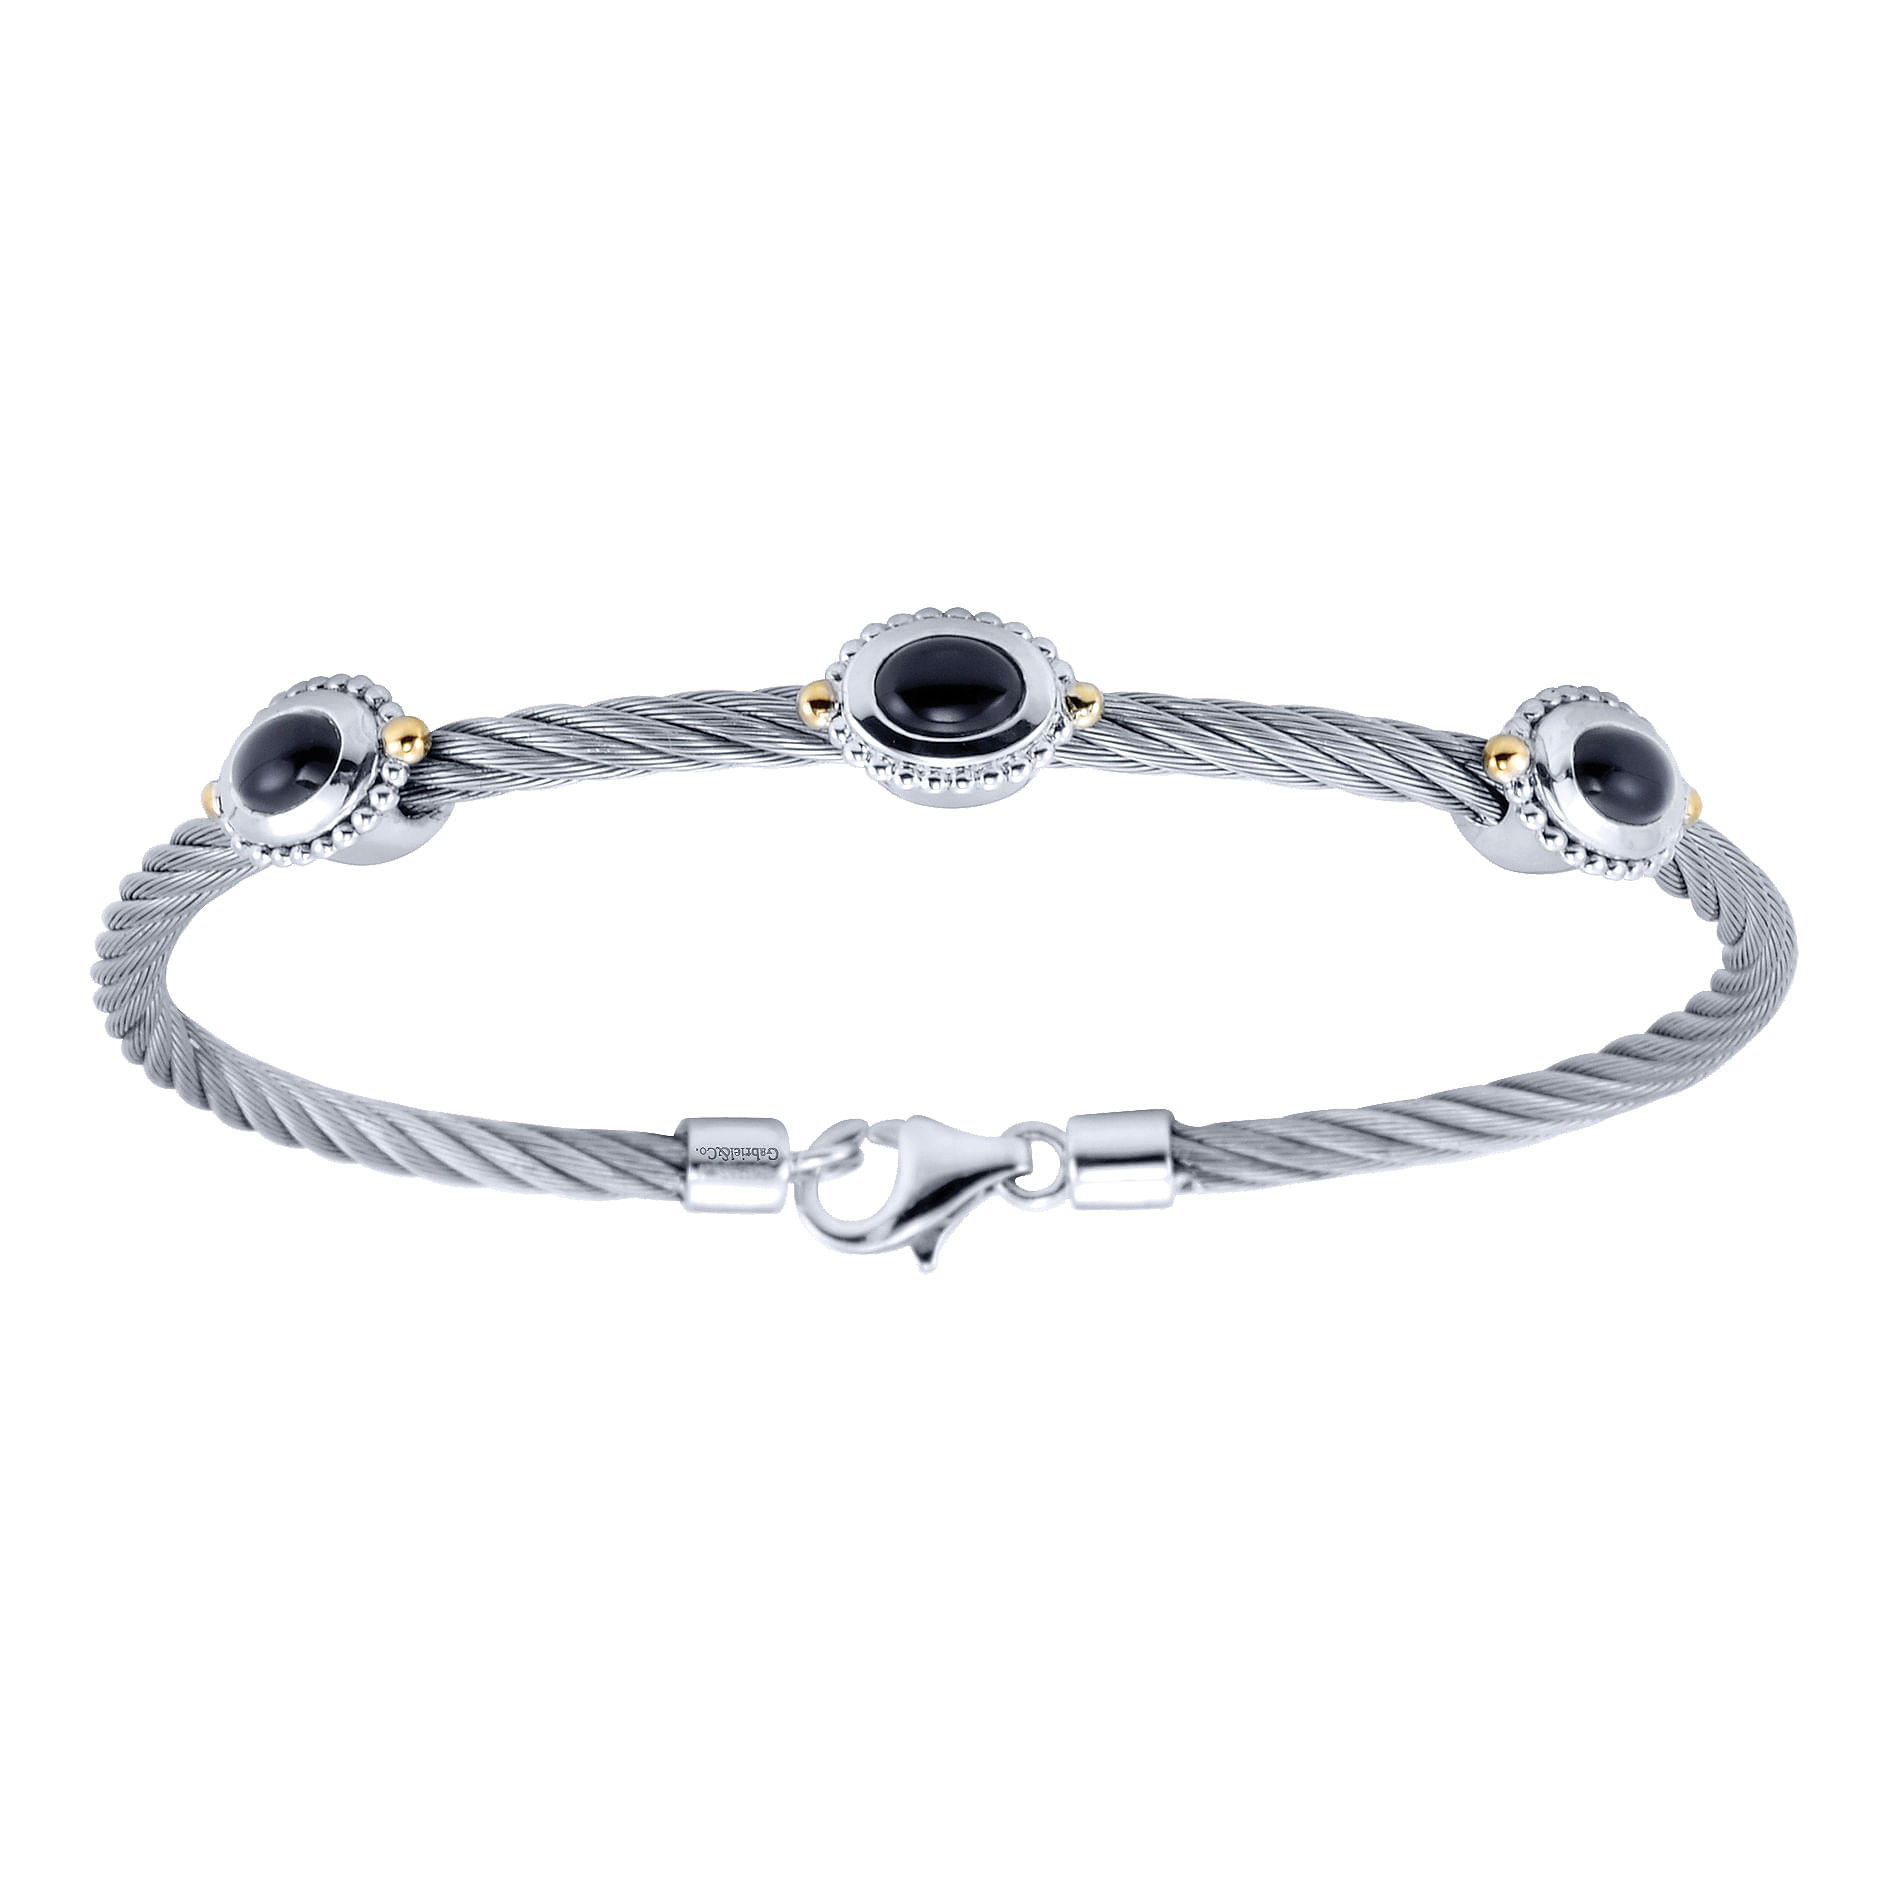 18K Yellow Gold-Silver-Stainless Steel Twisted Cable Bangle with 3 Oval Black Enamel Stations